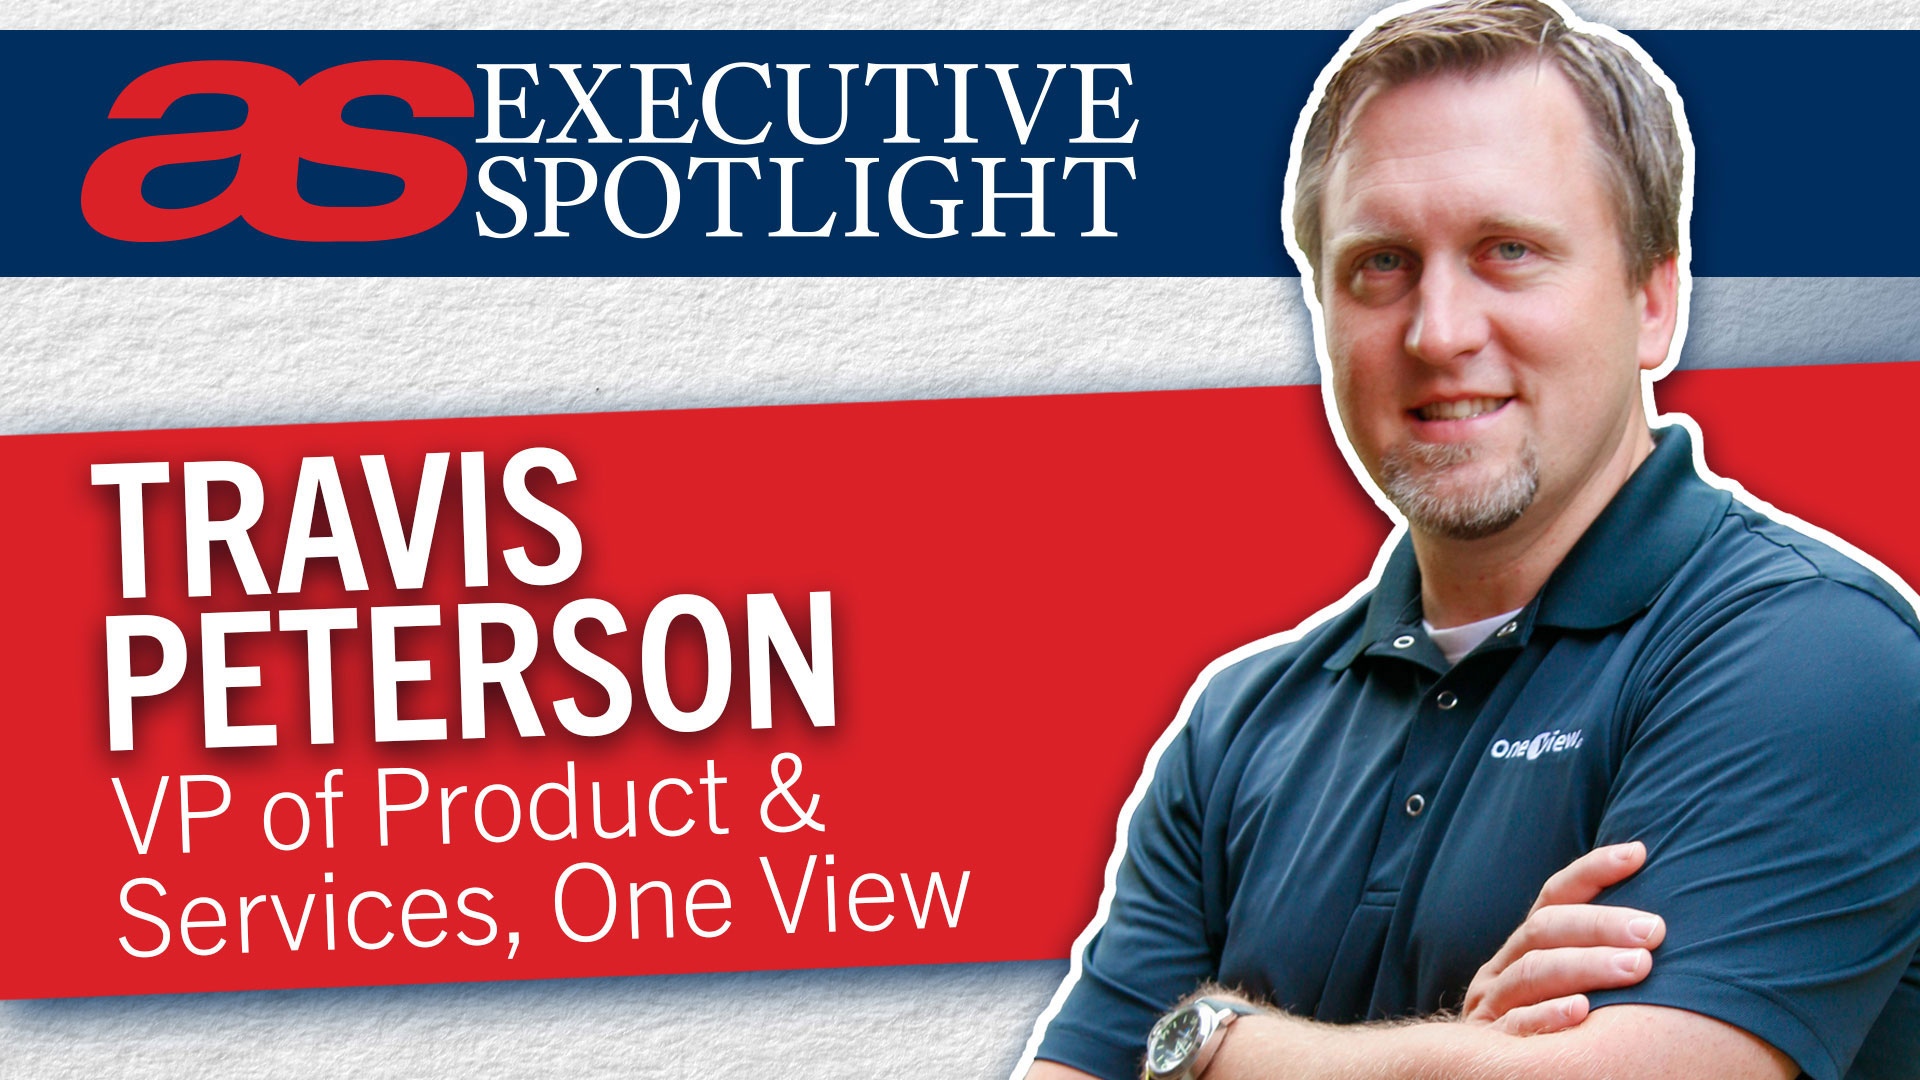 This interview with Travis Peterson from OneView in the Auto Success Executive Spotlight focuses on the transition of automotive dealerships to paperless operations.